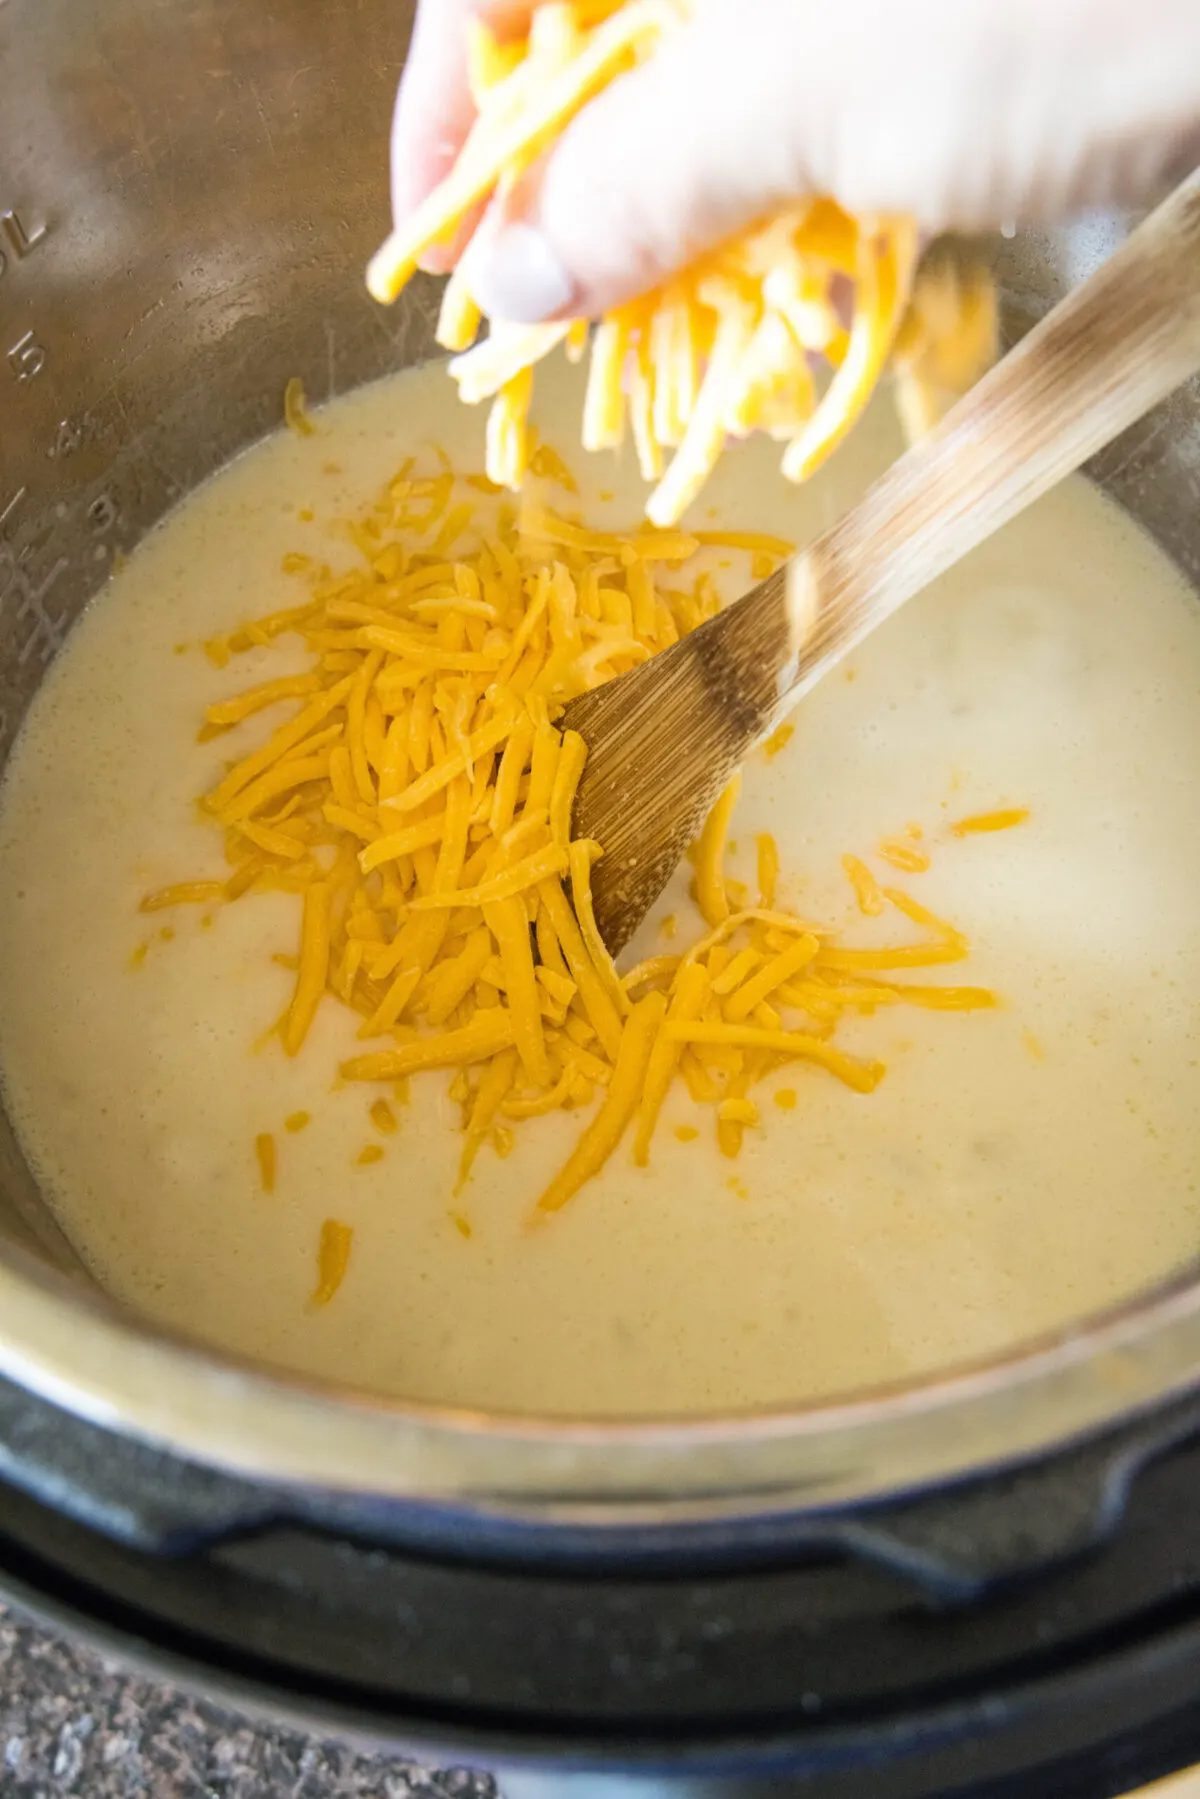 A hand dropping shredded cheese into a pot of potato soup with a wooden spoon.